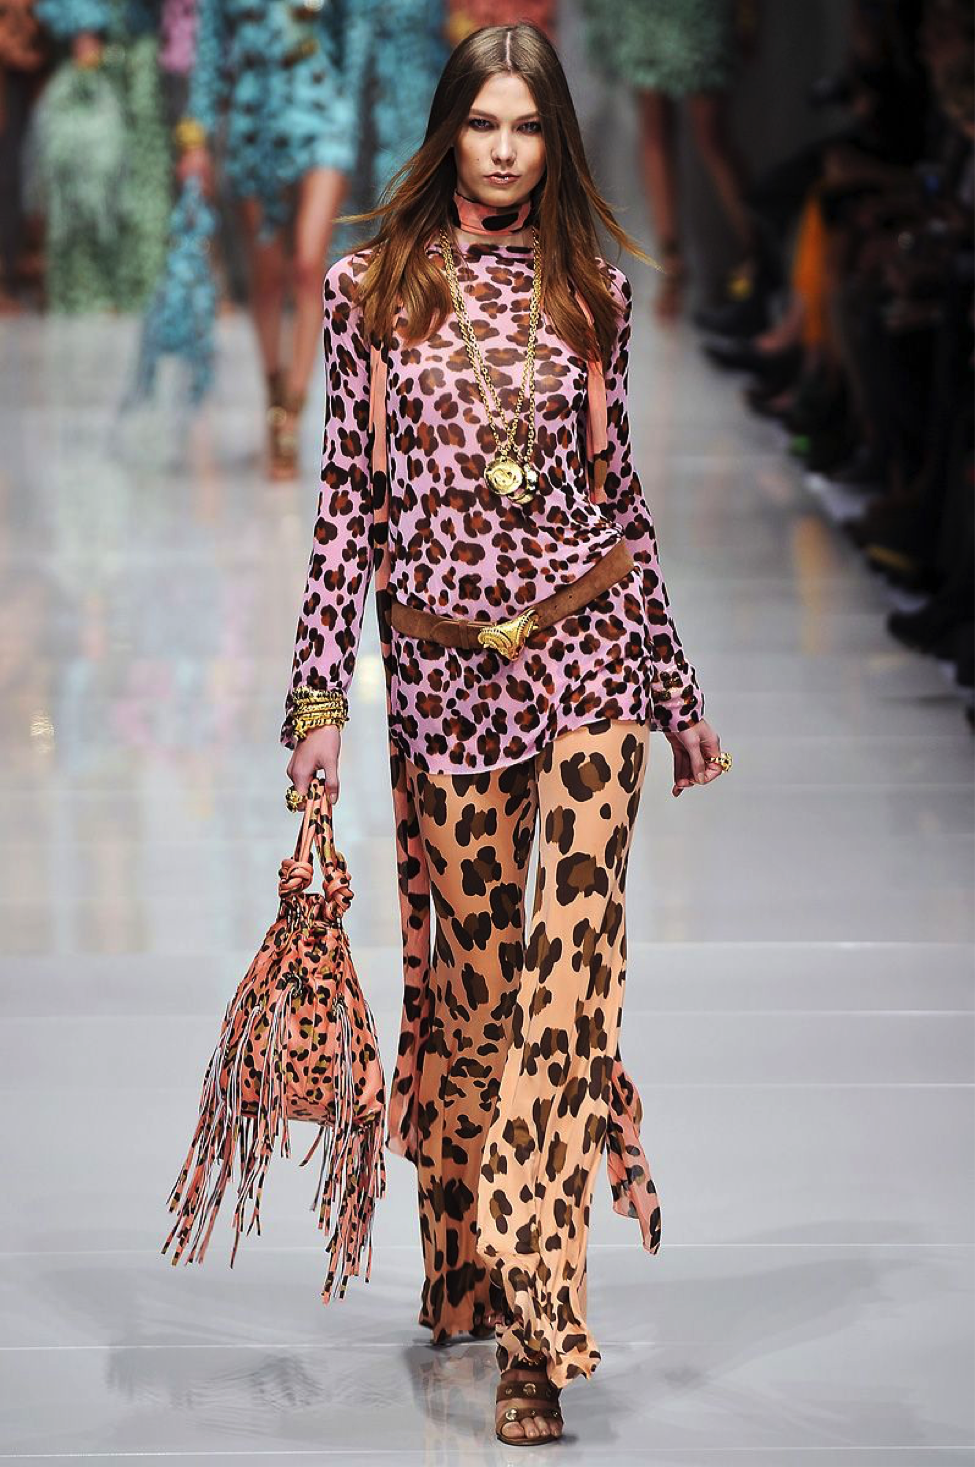 Celeb Trend to Try: Bold Leopard Print for summer | The Fashion Brief